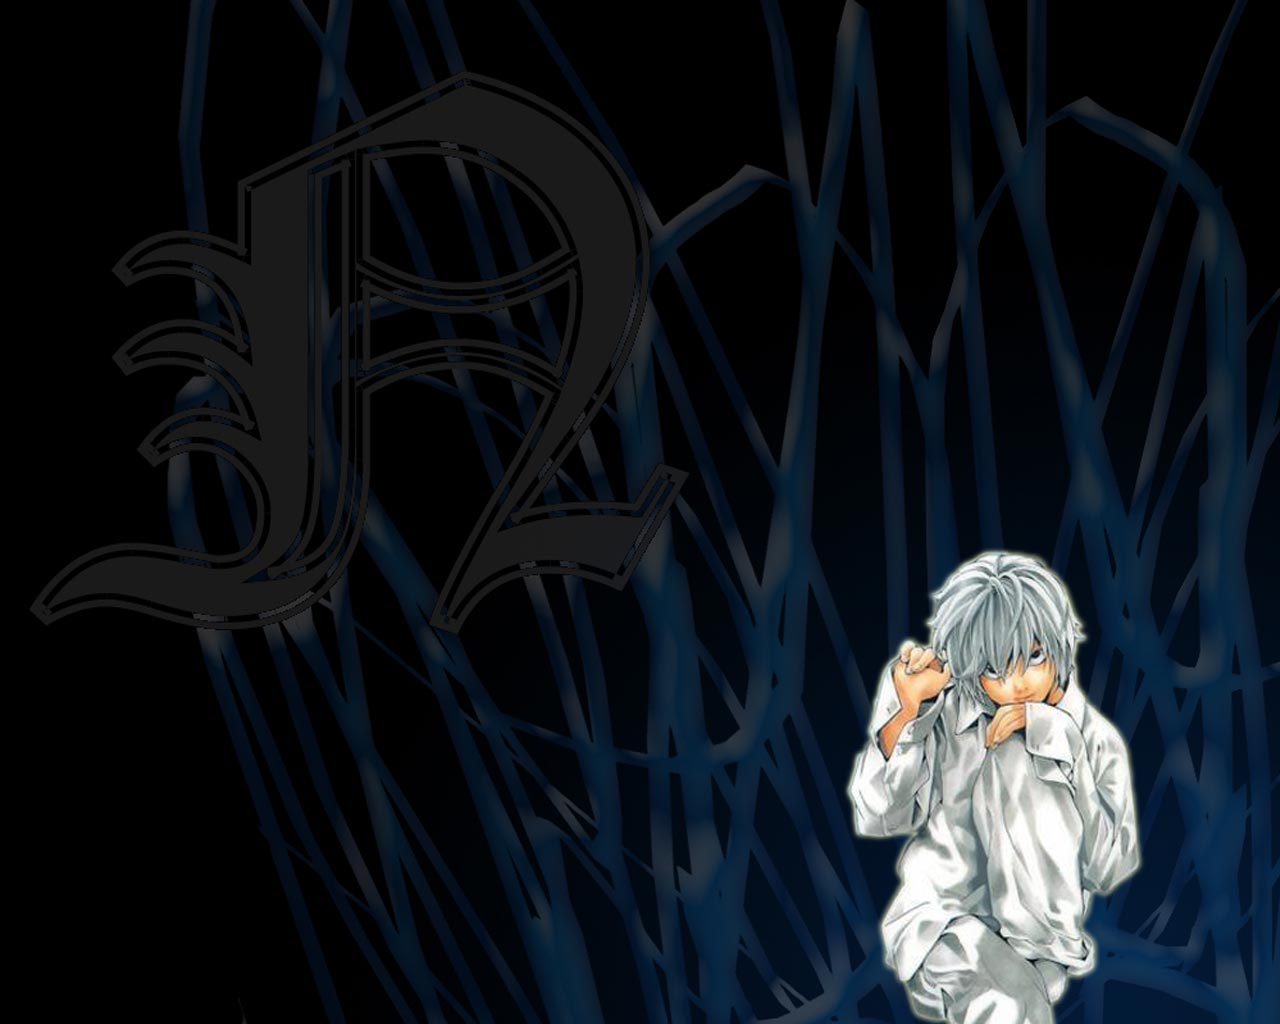 Near Death Note Wallpapers